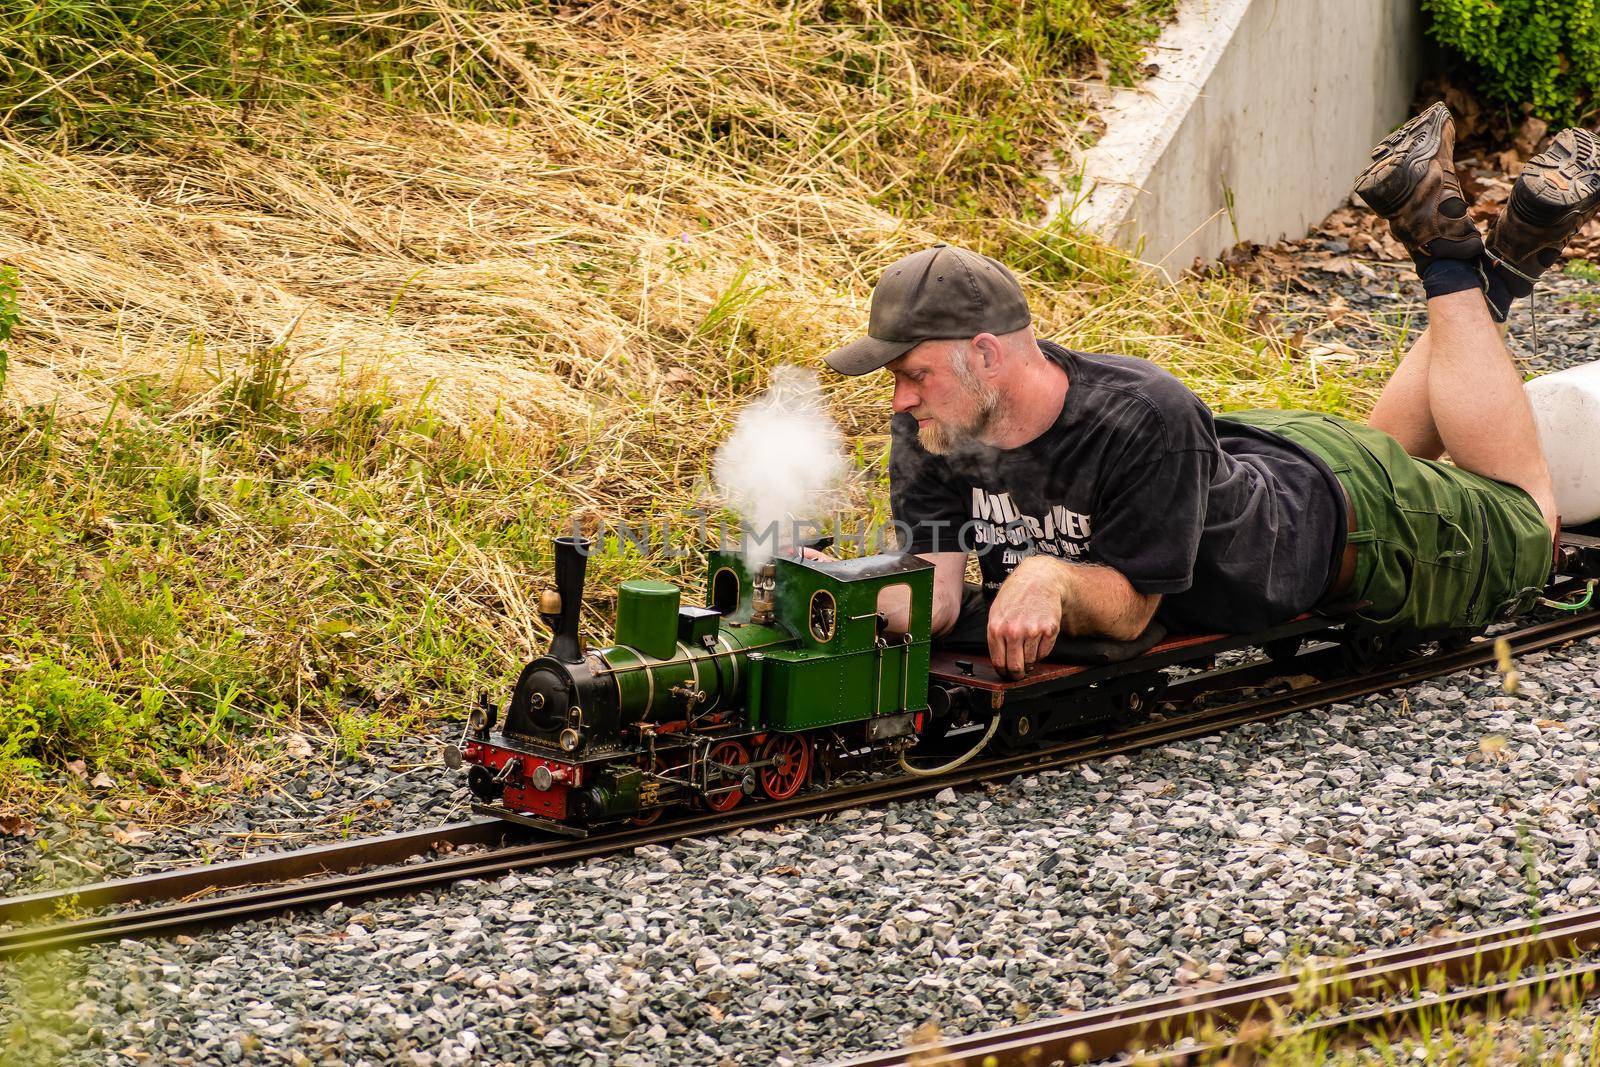 A man lying down drives a model of a steam locomotive by rostik924